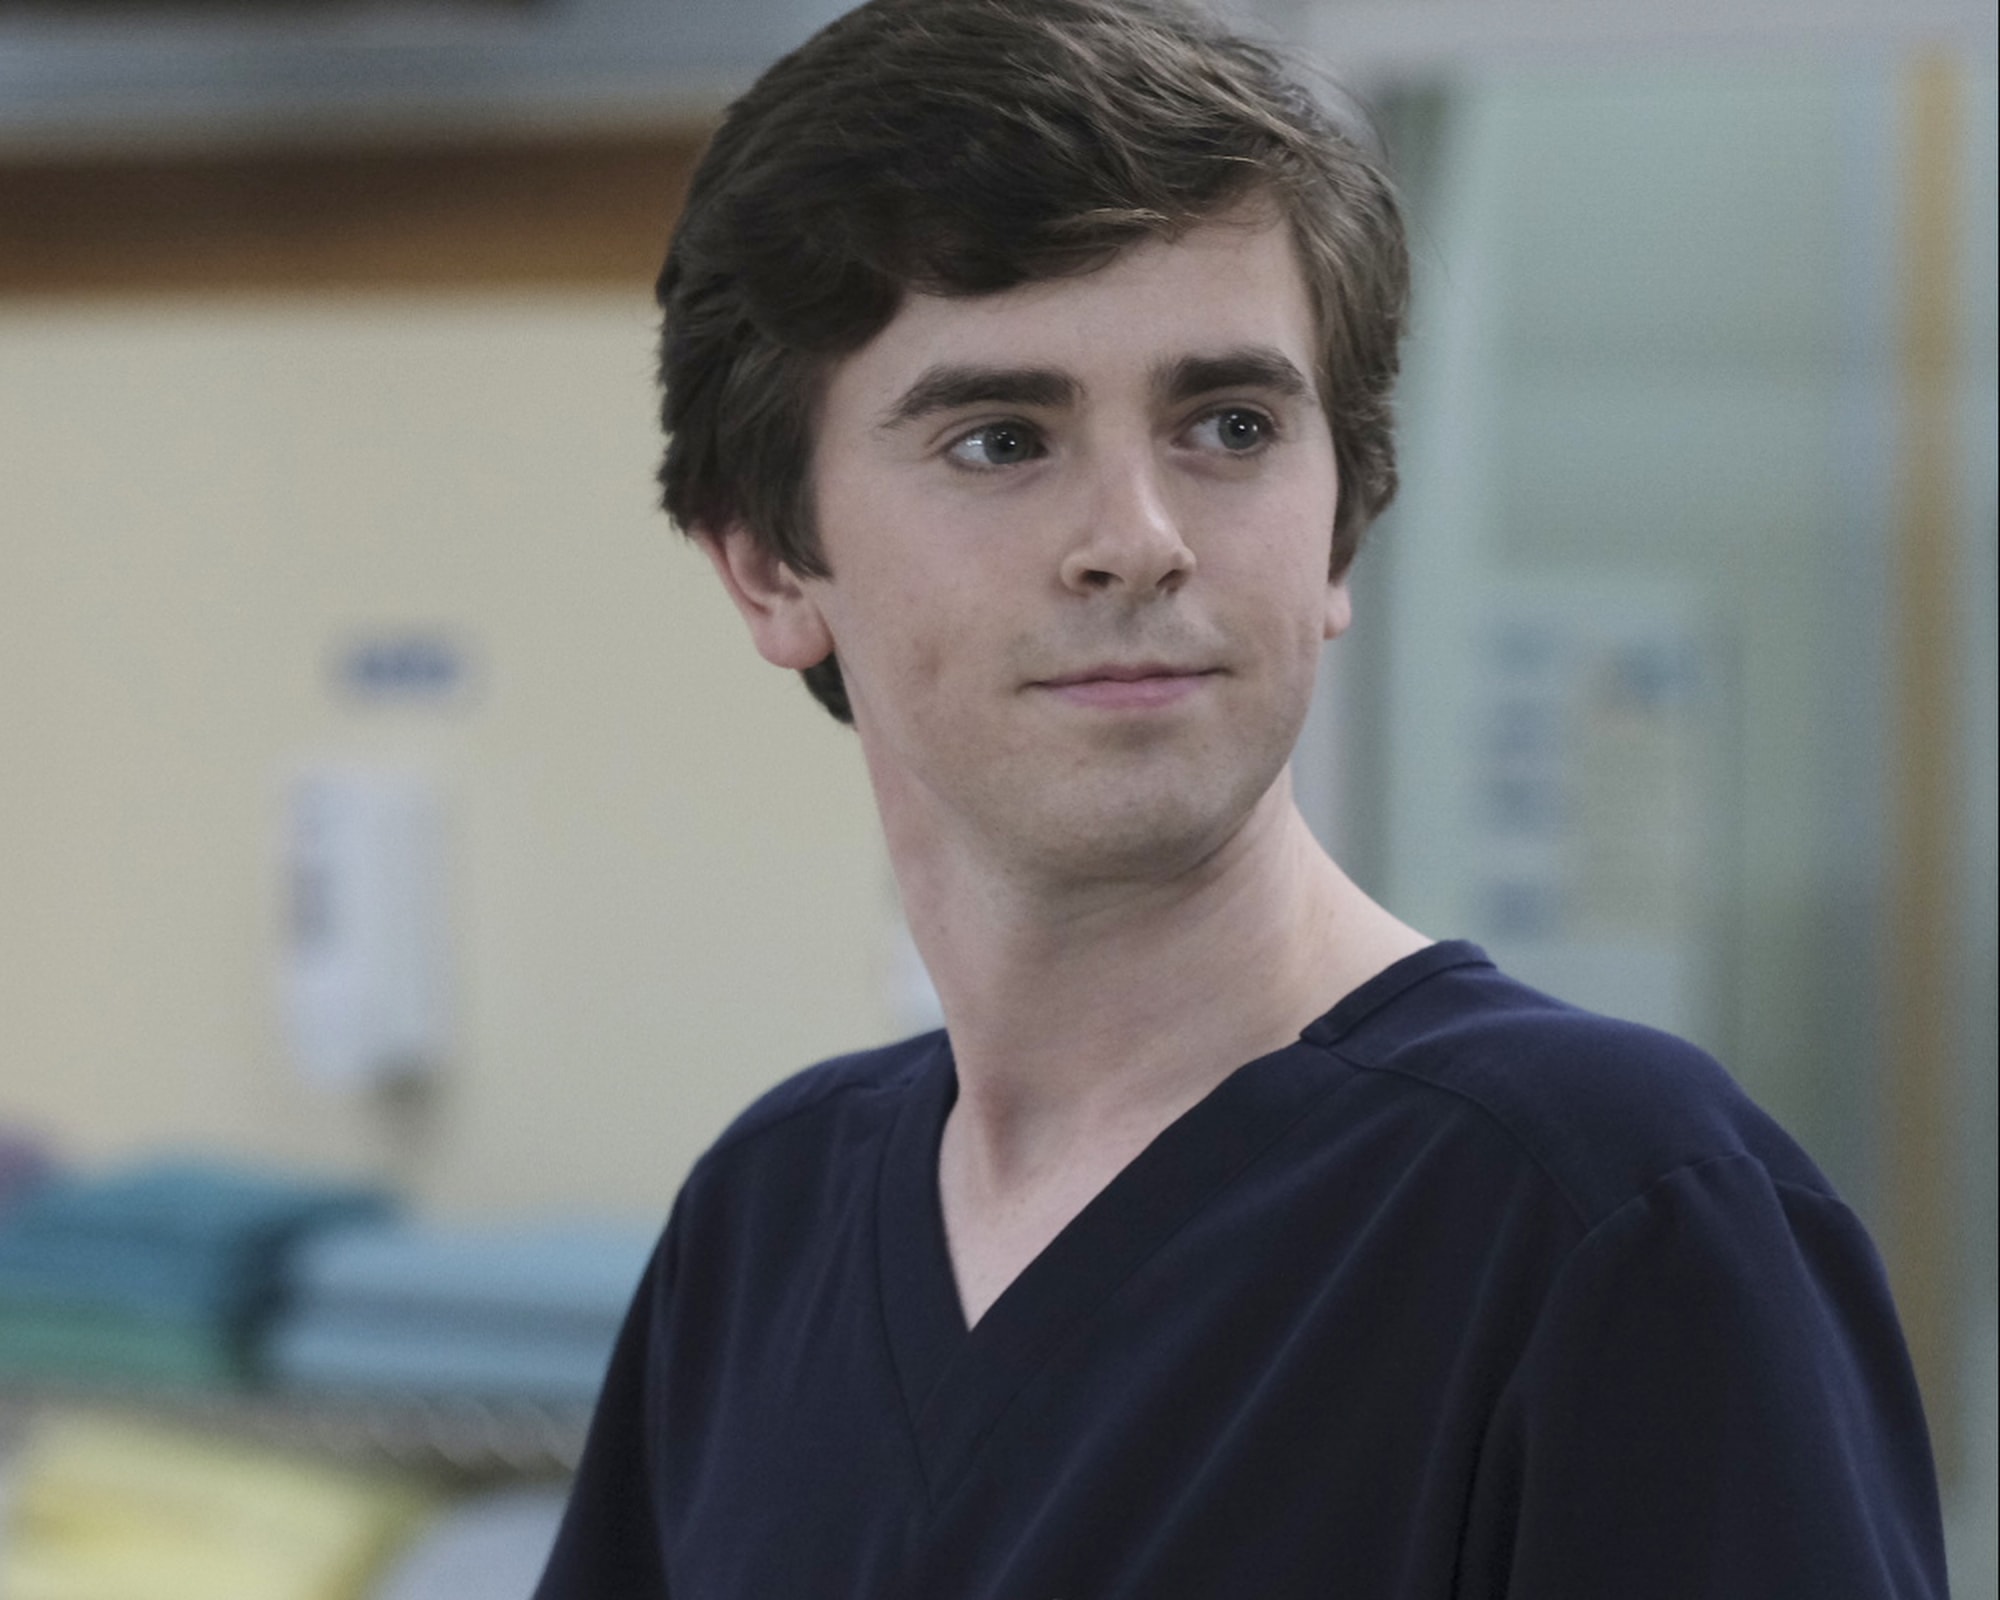 When does The Good Doctor return on the ABC Network?